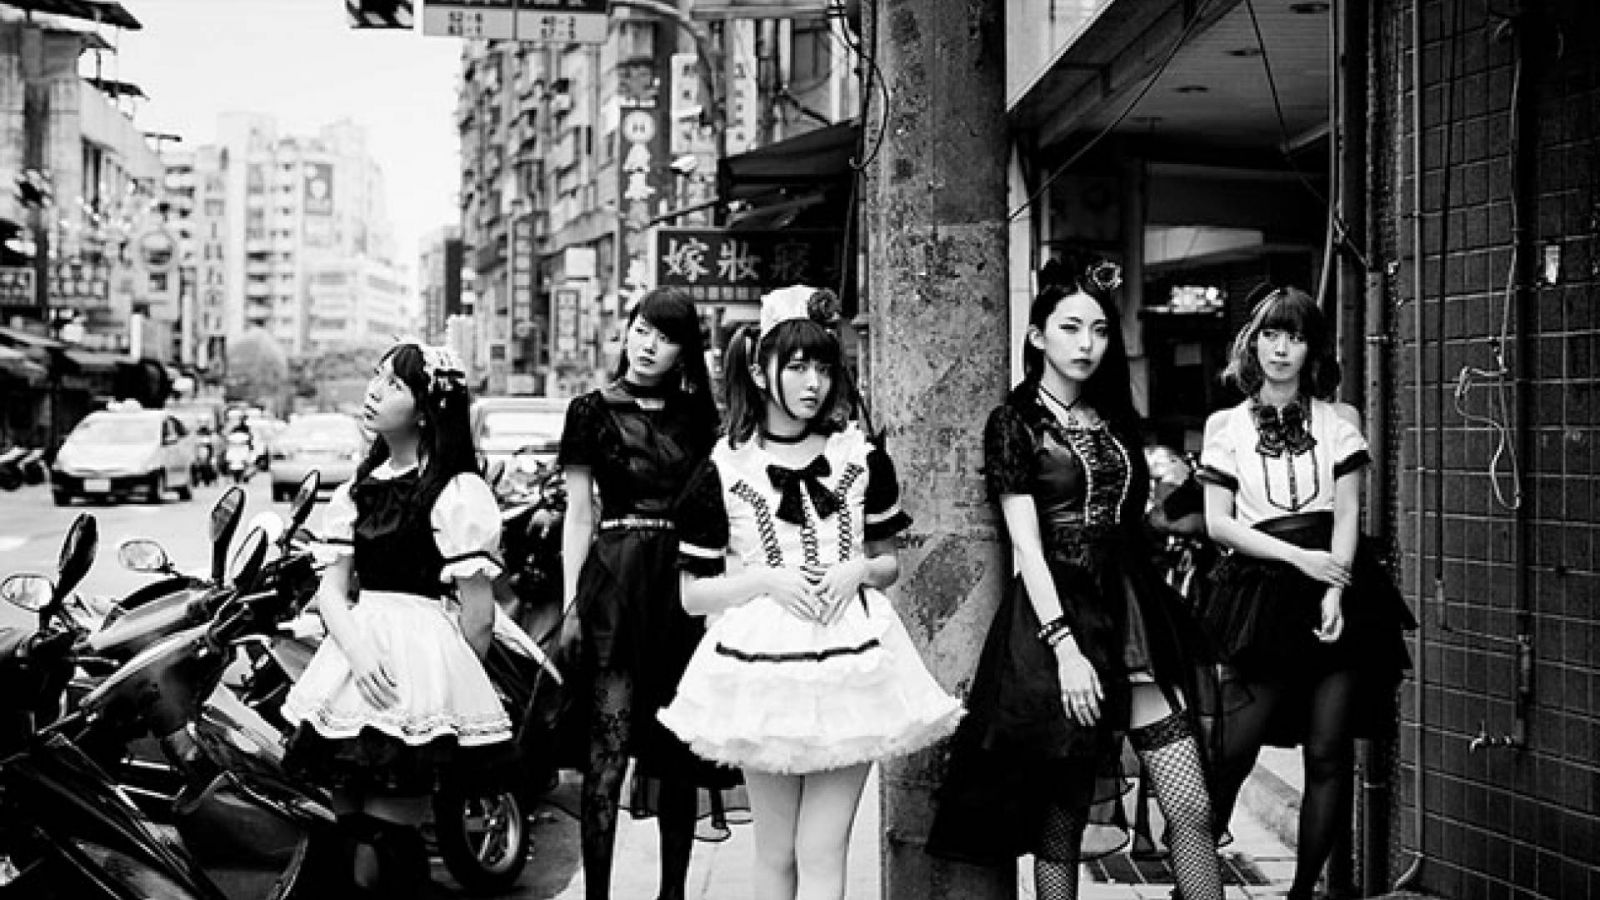 BAND-MAID to Tour Europe © PLATINUM PASSPORT. All rights reserved.